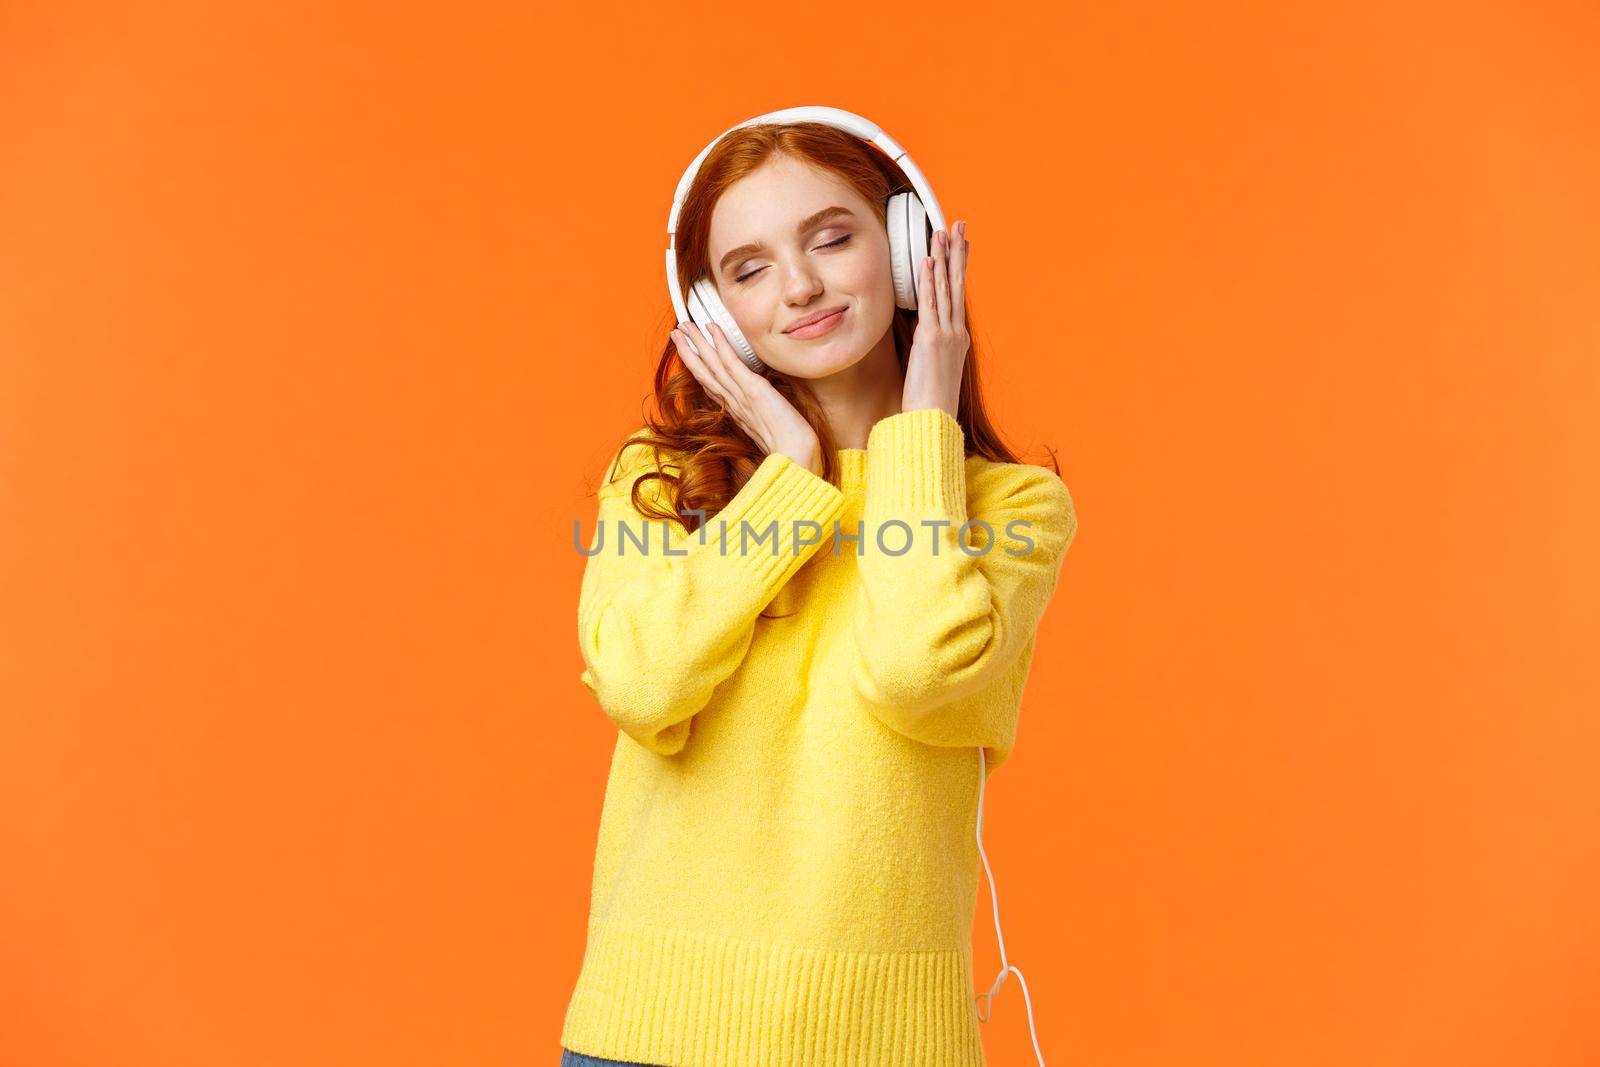 Girl enjoying nice soft sound of headphones. Cheerful romantic and delighted pretty redhead woman tilt head with closed eyes and tender smile, carried away with music in earphones.